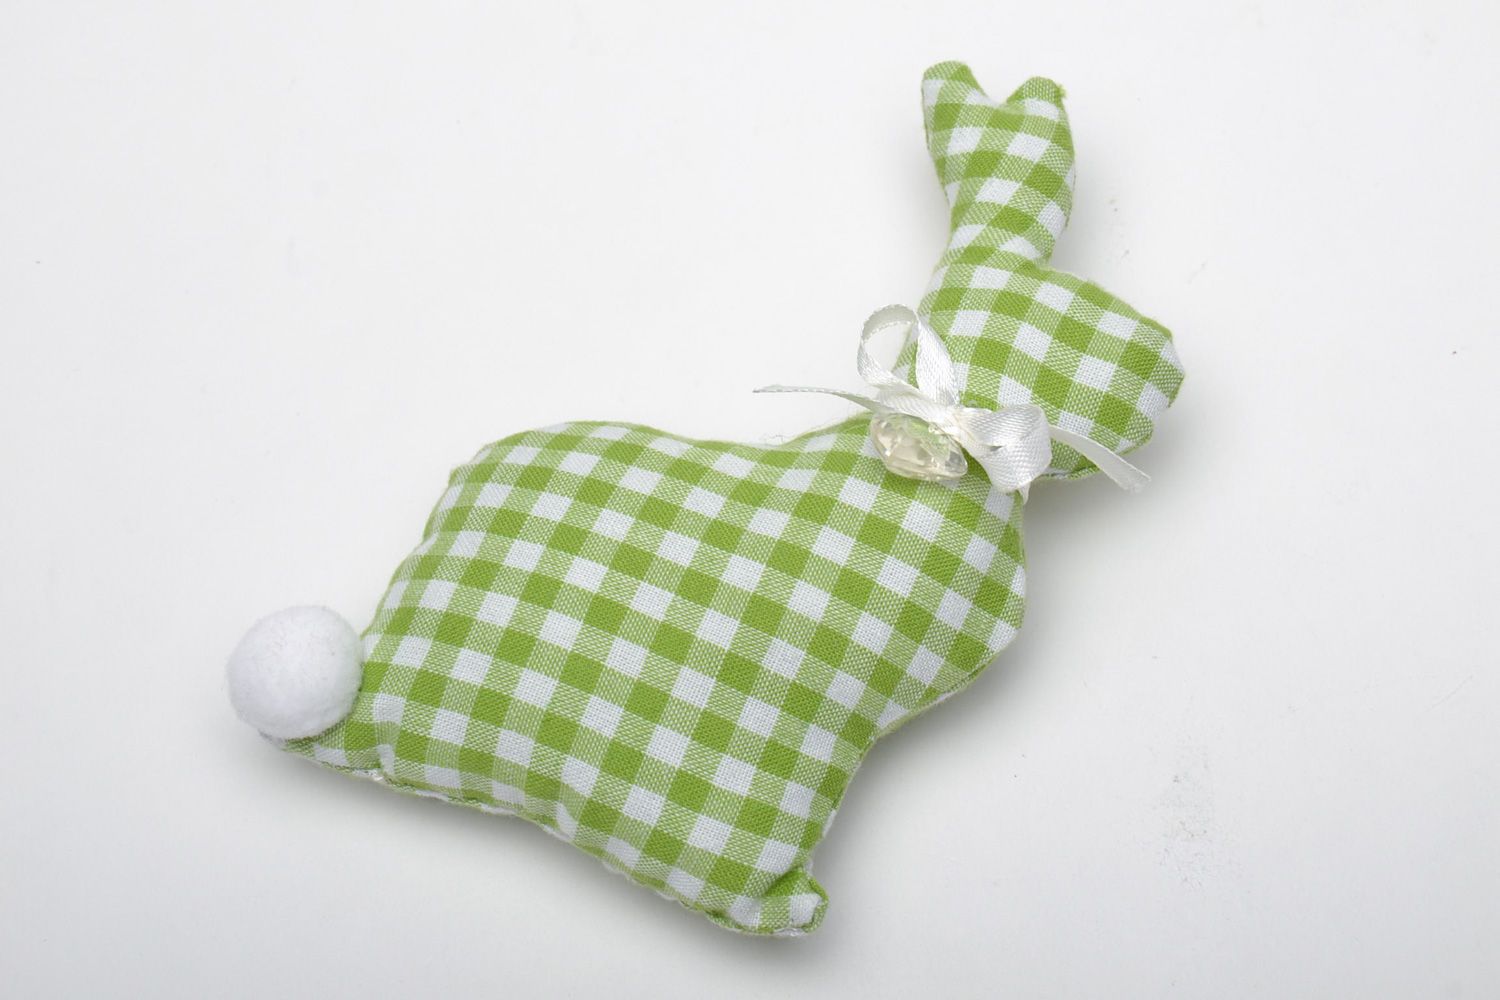 Handmade interior soft toy sewn of checkered green fabric in the shape of rabbit  photo 3